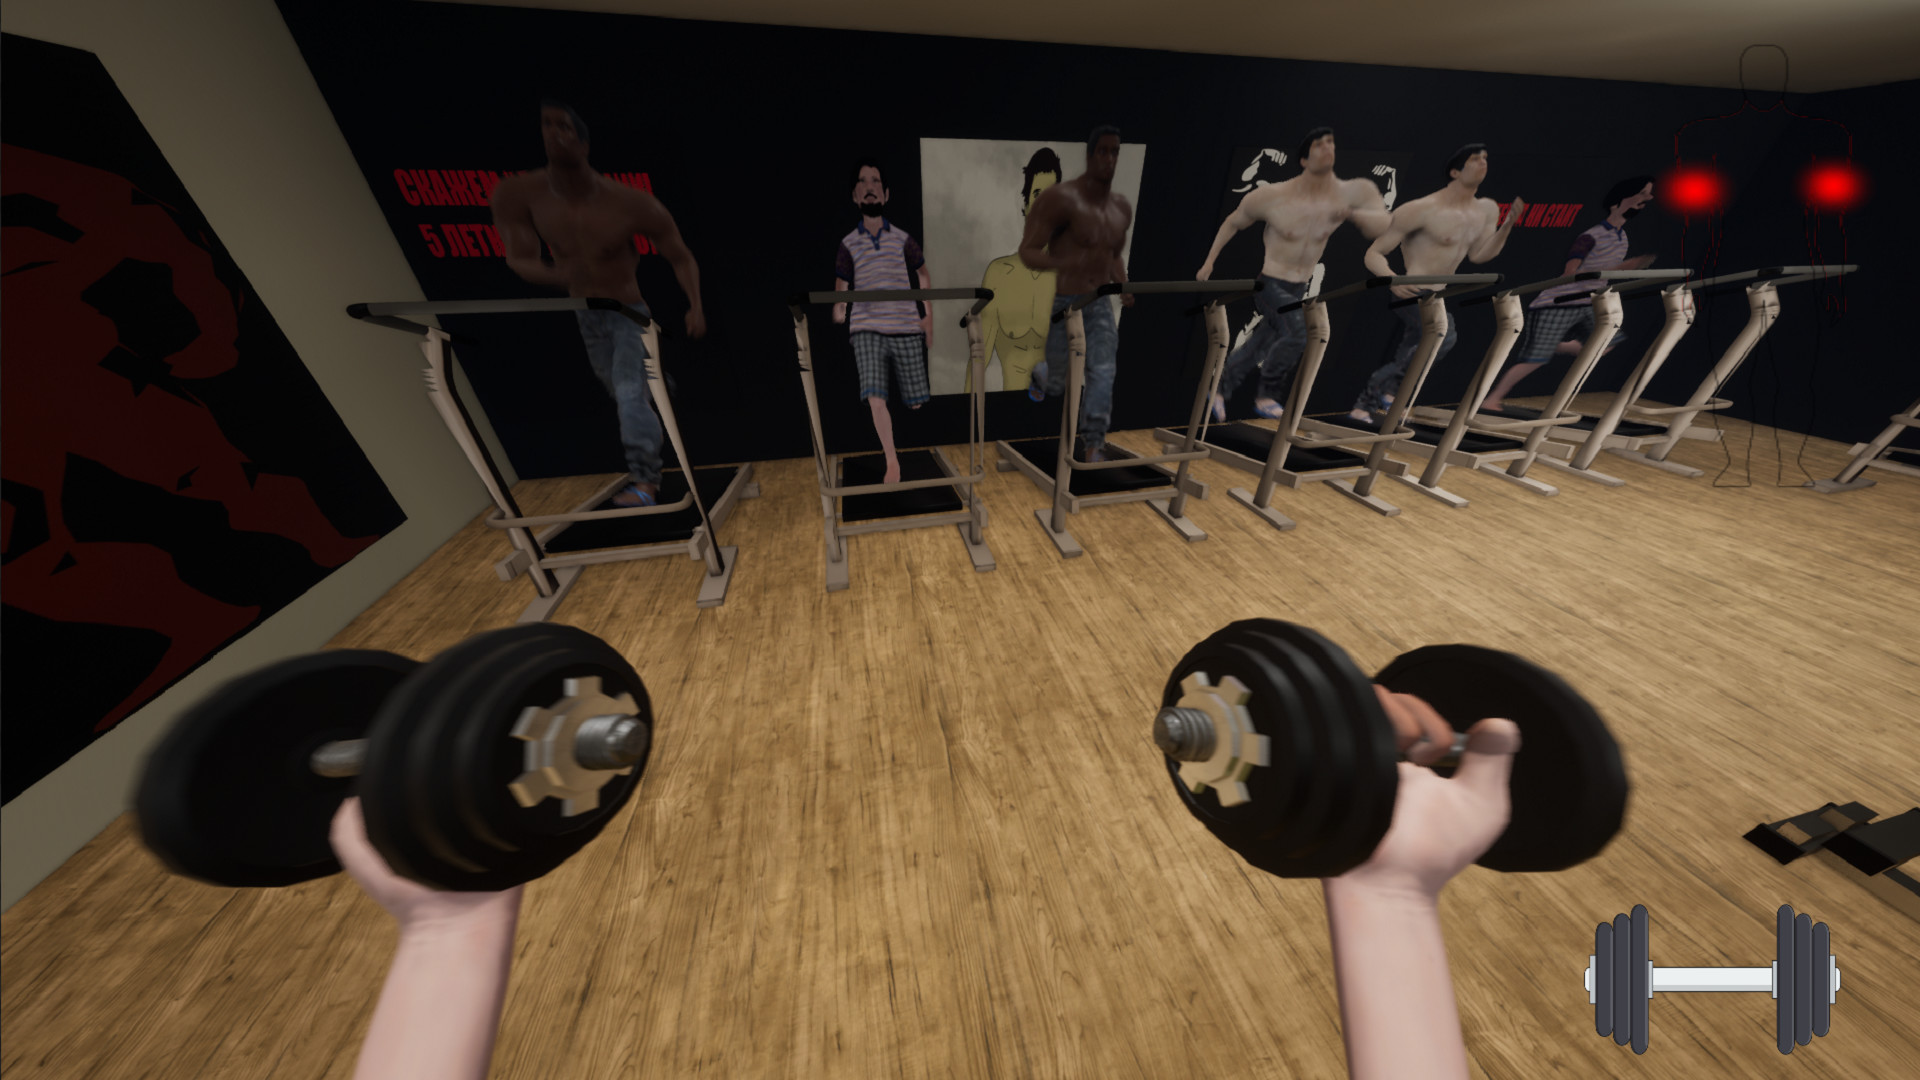 Gonna go to the gym IRL, then go home and play Gym Simulator to get some ex...